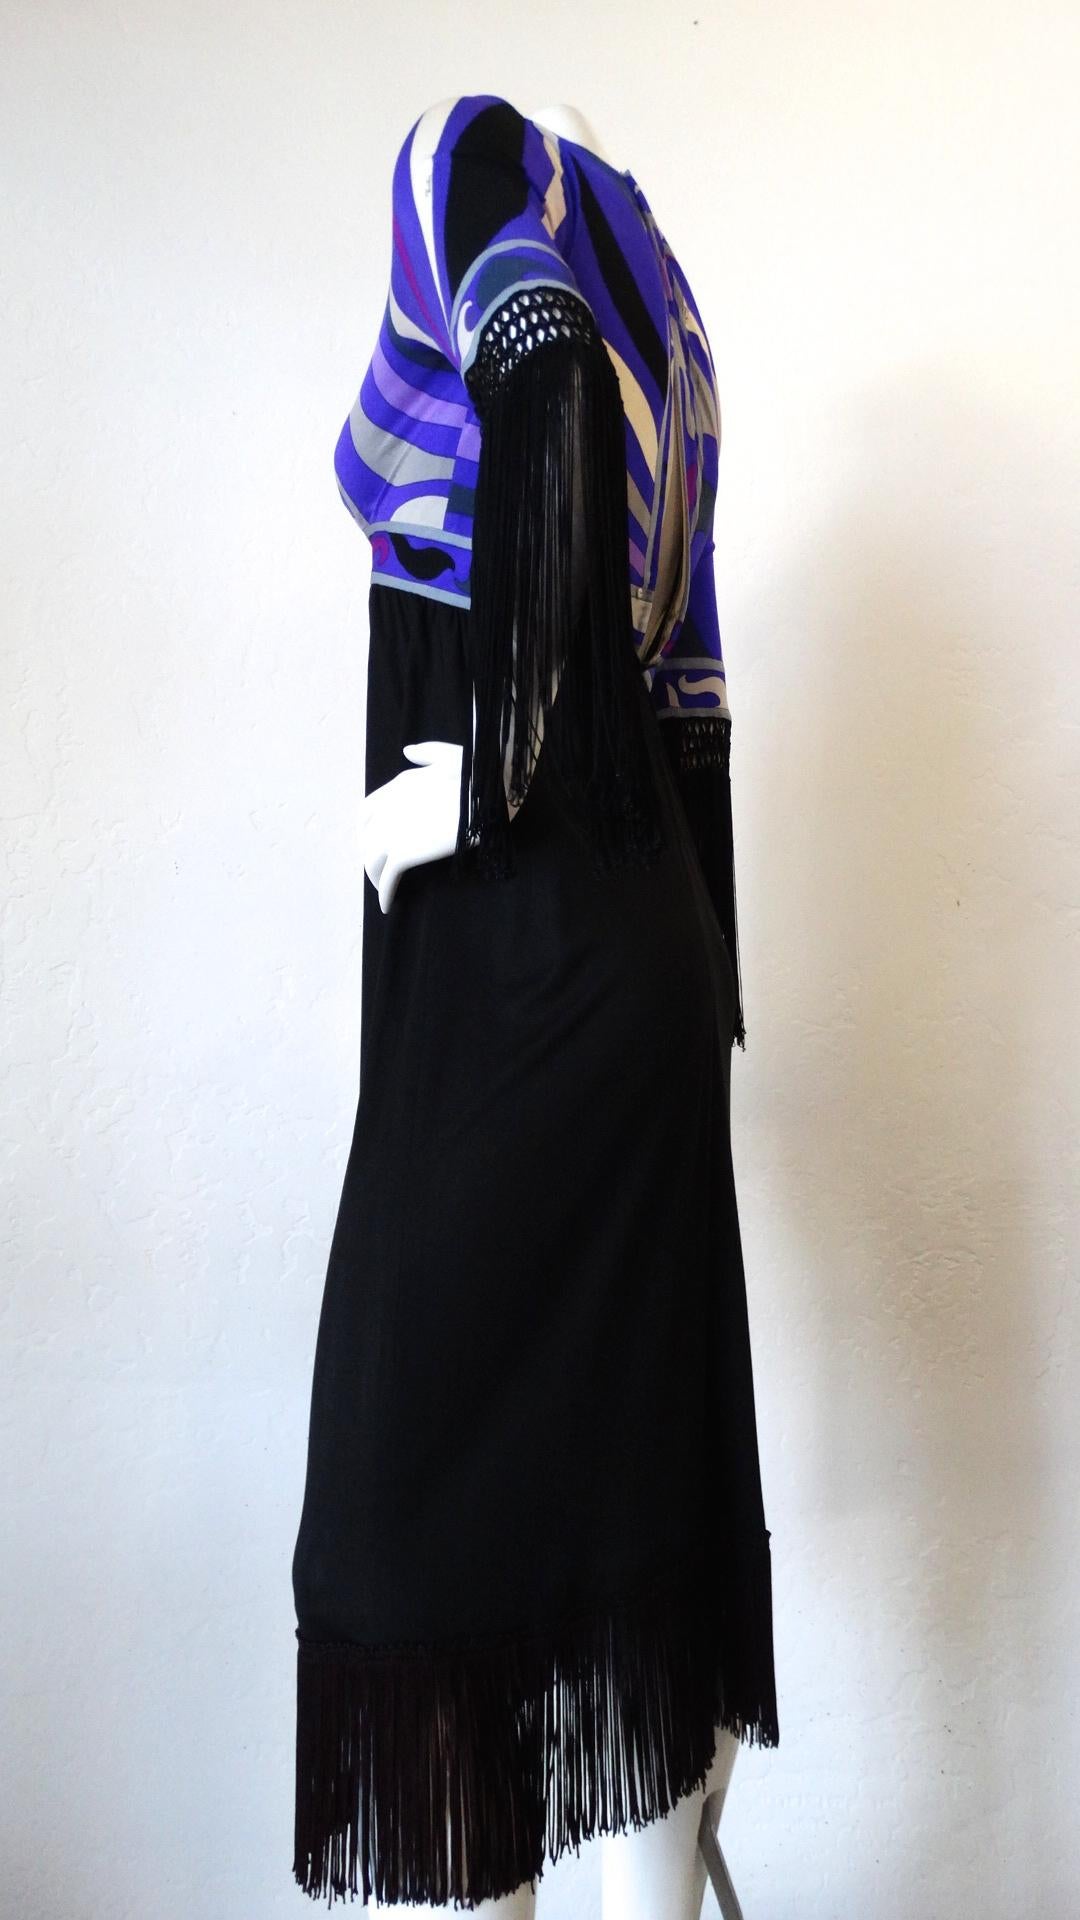 No Pucci collection is complete without our amazing 1960s Emilio Pucci printed fringe dress! Bust features Pucci's signature swirling pattern in incredible shades of purple! Woven, long black fringe trims each of the sleeves, adding just the right